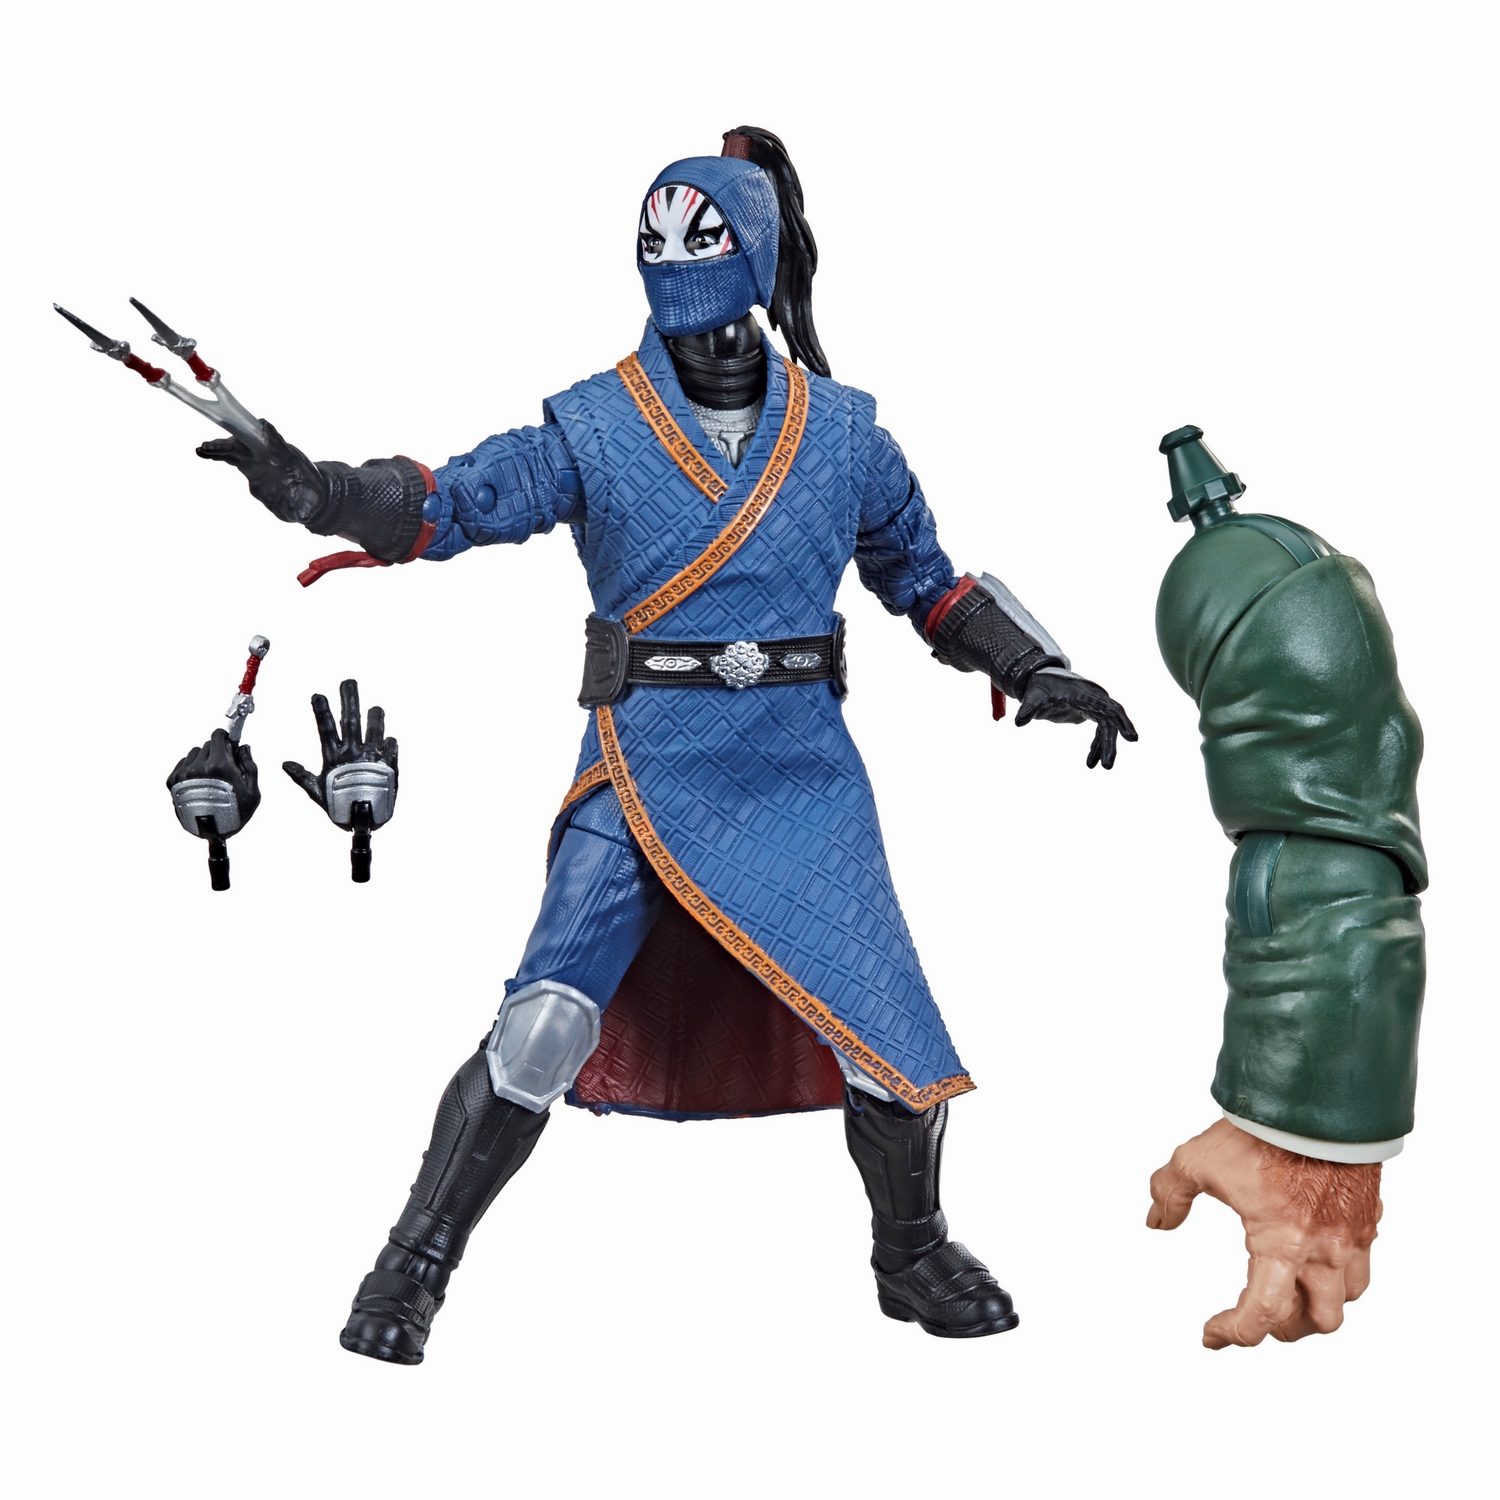 MARVEL LEGENDS SERIES 6-INCH SHANG-CHI AND THE LEGEND OF THE TEN RINGS- DeathDealer oop.jpg